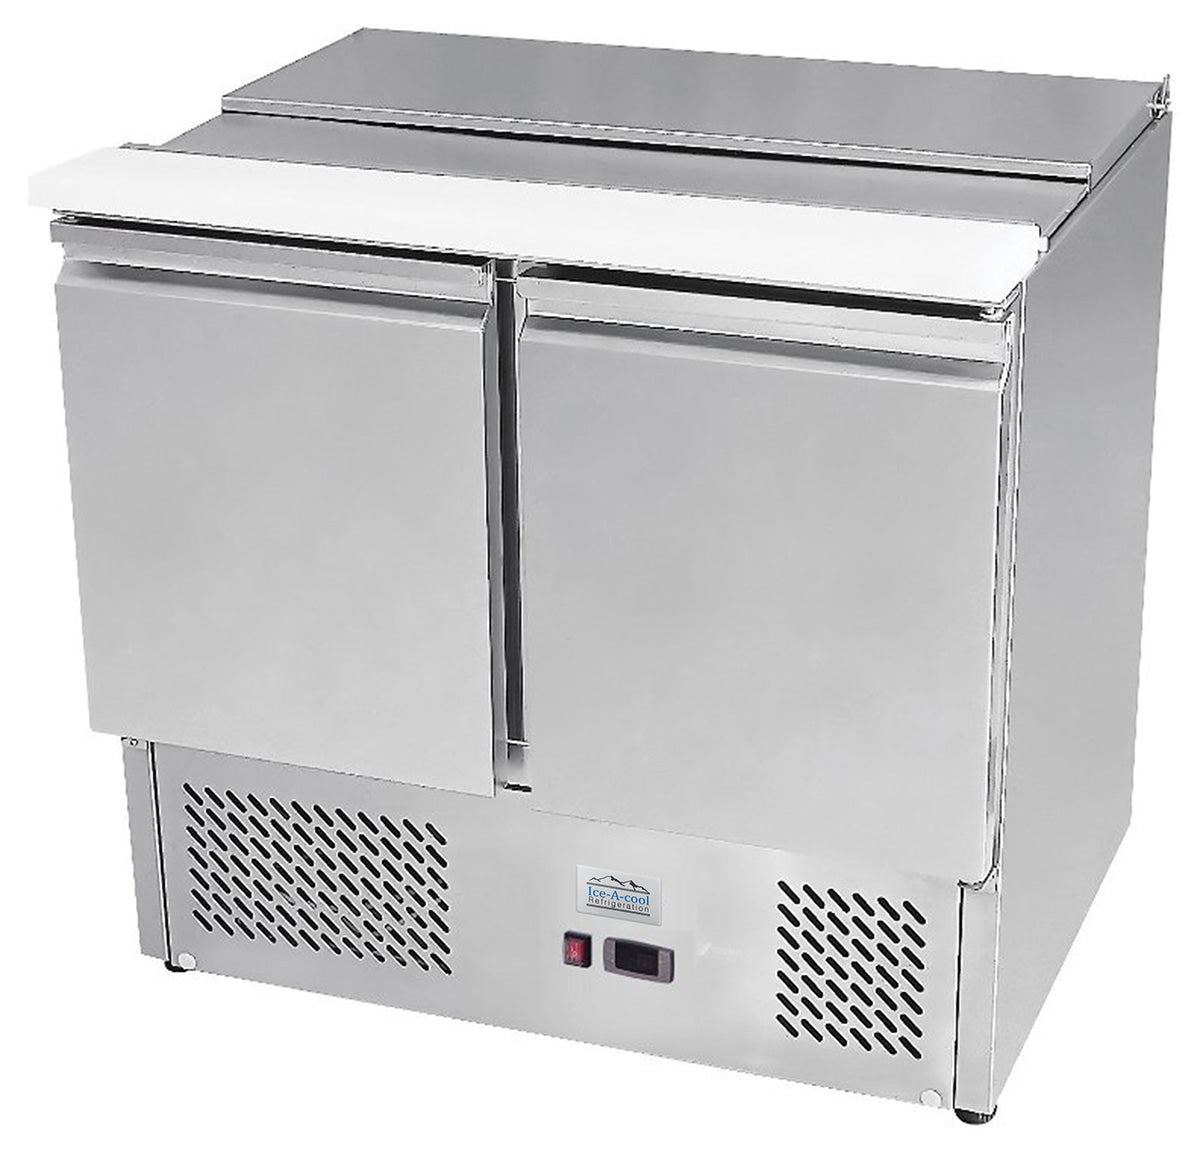 Ice-A-Cool ICE3800GR 2 Door Refrigerated Saladette Prep Counter 300 Litres JD Catering Equipment Solutions Ltd